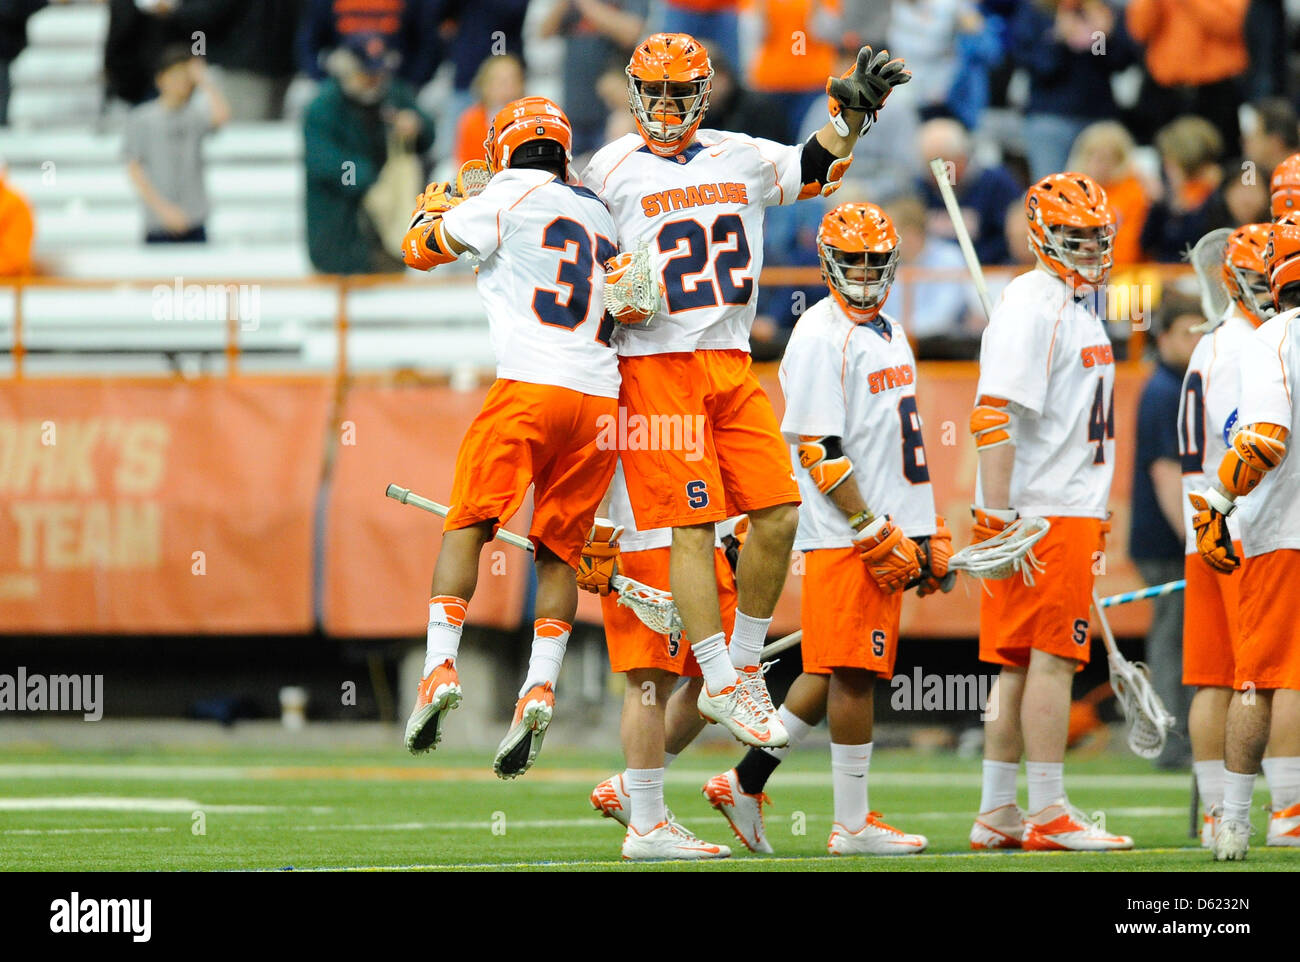 April 10, 2013 - Syracuse, New York, USA - April 10, 2013: Syracuse Orange midfielders JoJo Marasco #22 and Drew Jenkins #37 chest bump prior to the start of an NCAA Lacrosse game between the Cornell Big Red and the Syracuse Orange at the Carrier Dome in Syracuse, New York. Syracuse won the game 13-12. Stock Photo